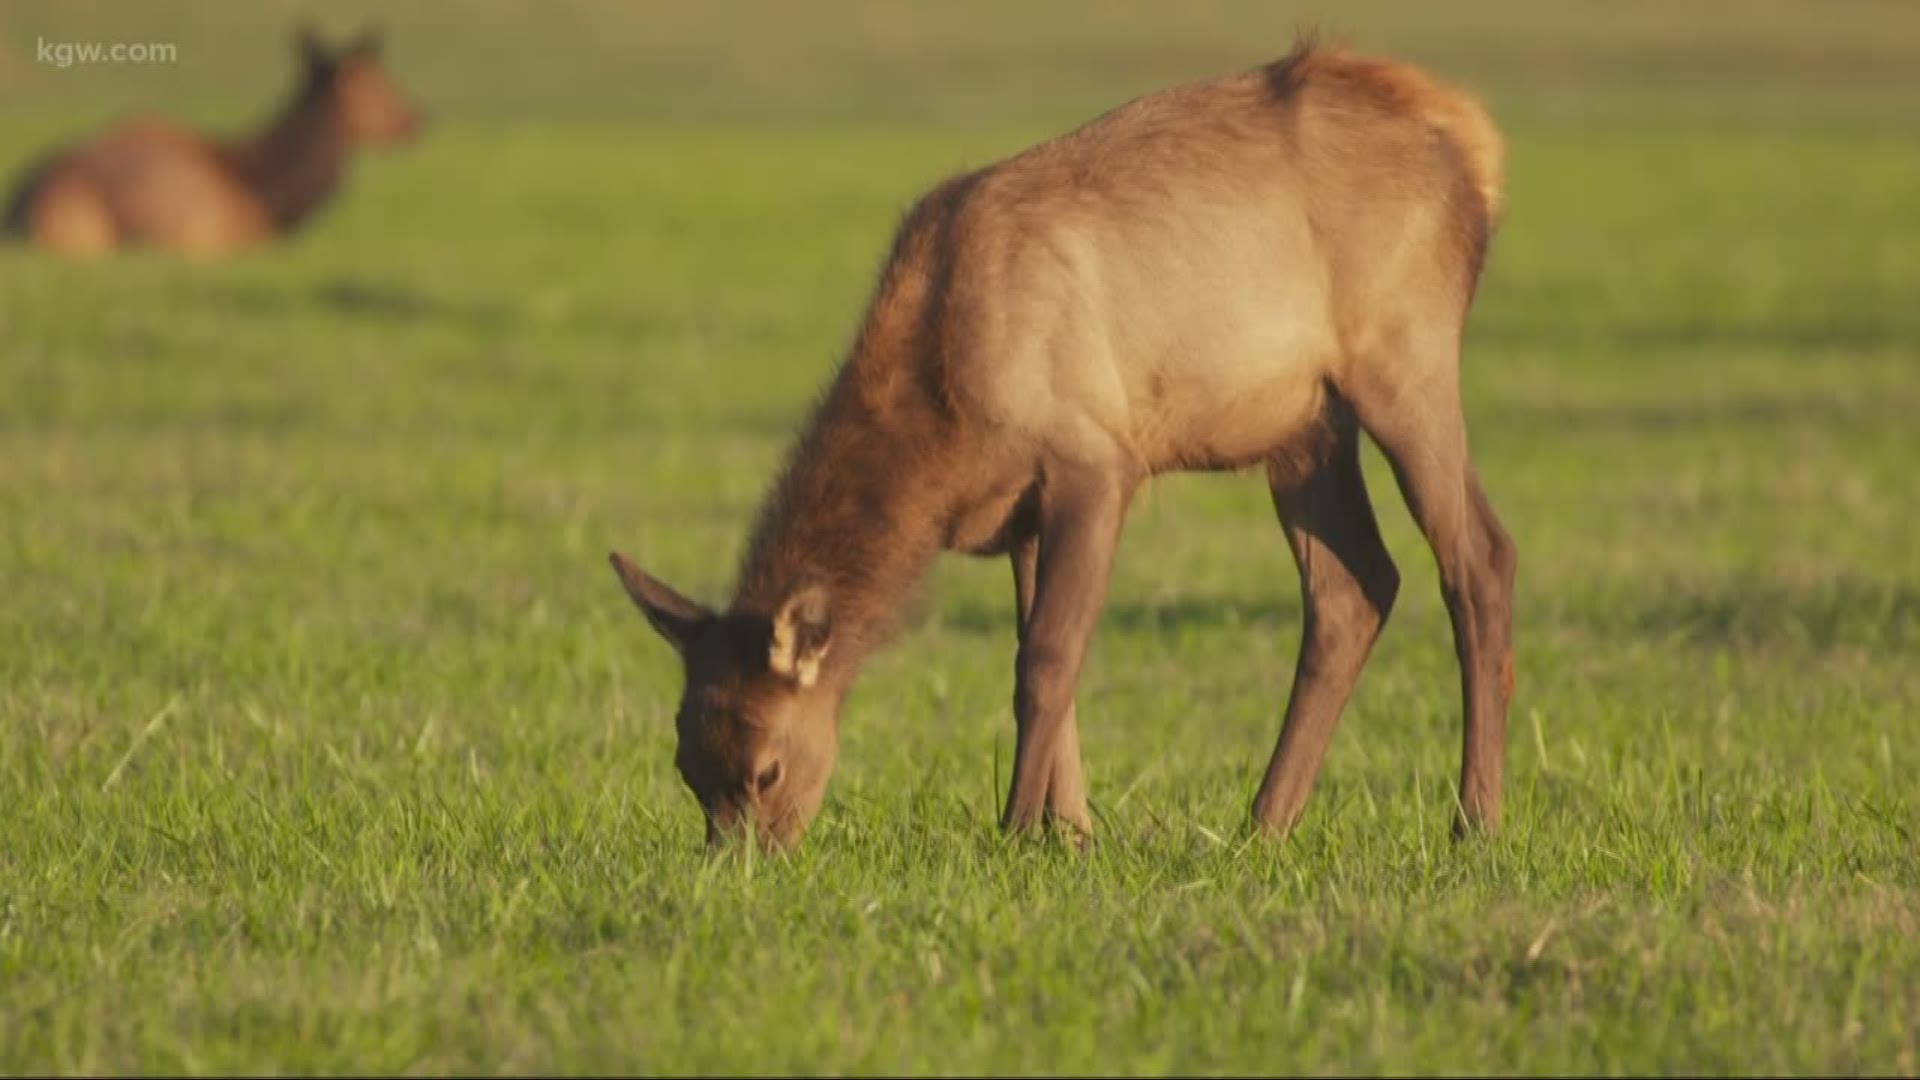 Grant McOmie takes us to the Jewell area in the north Oregon coast range for a look at the rutting season.